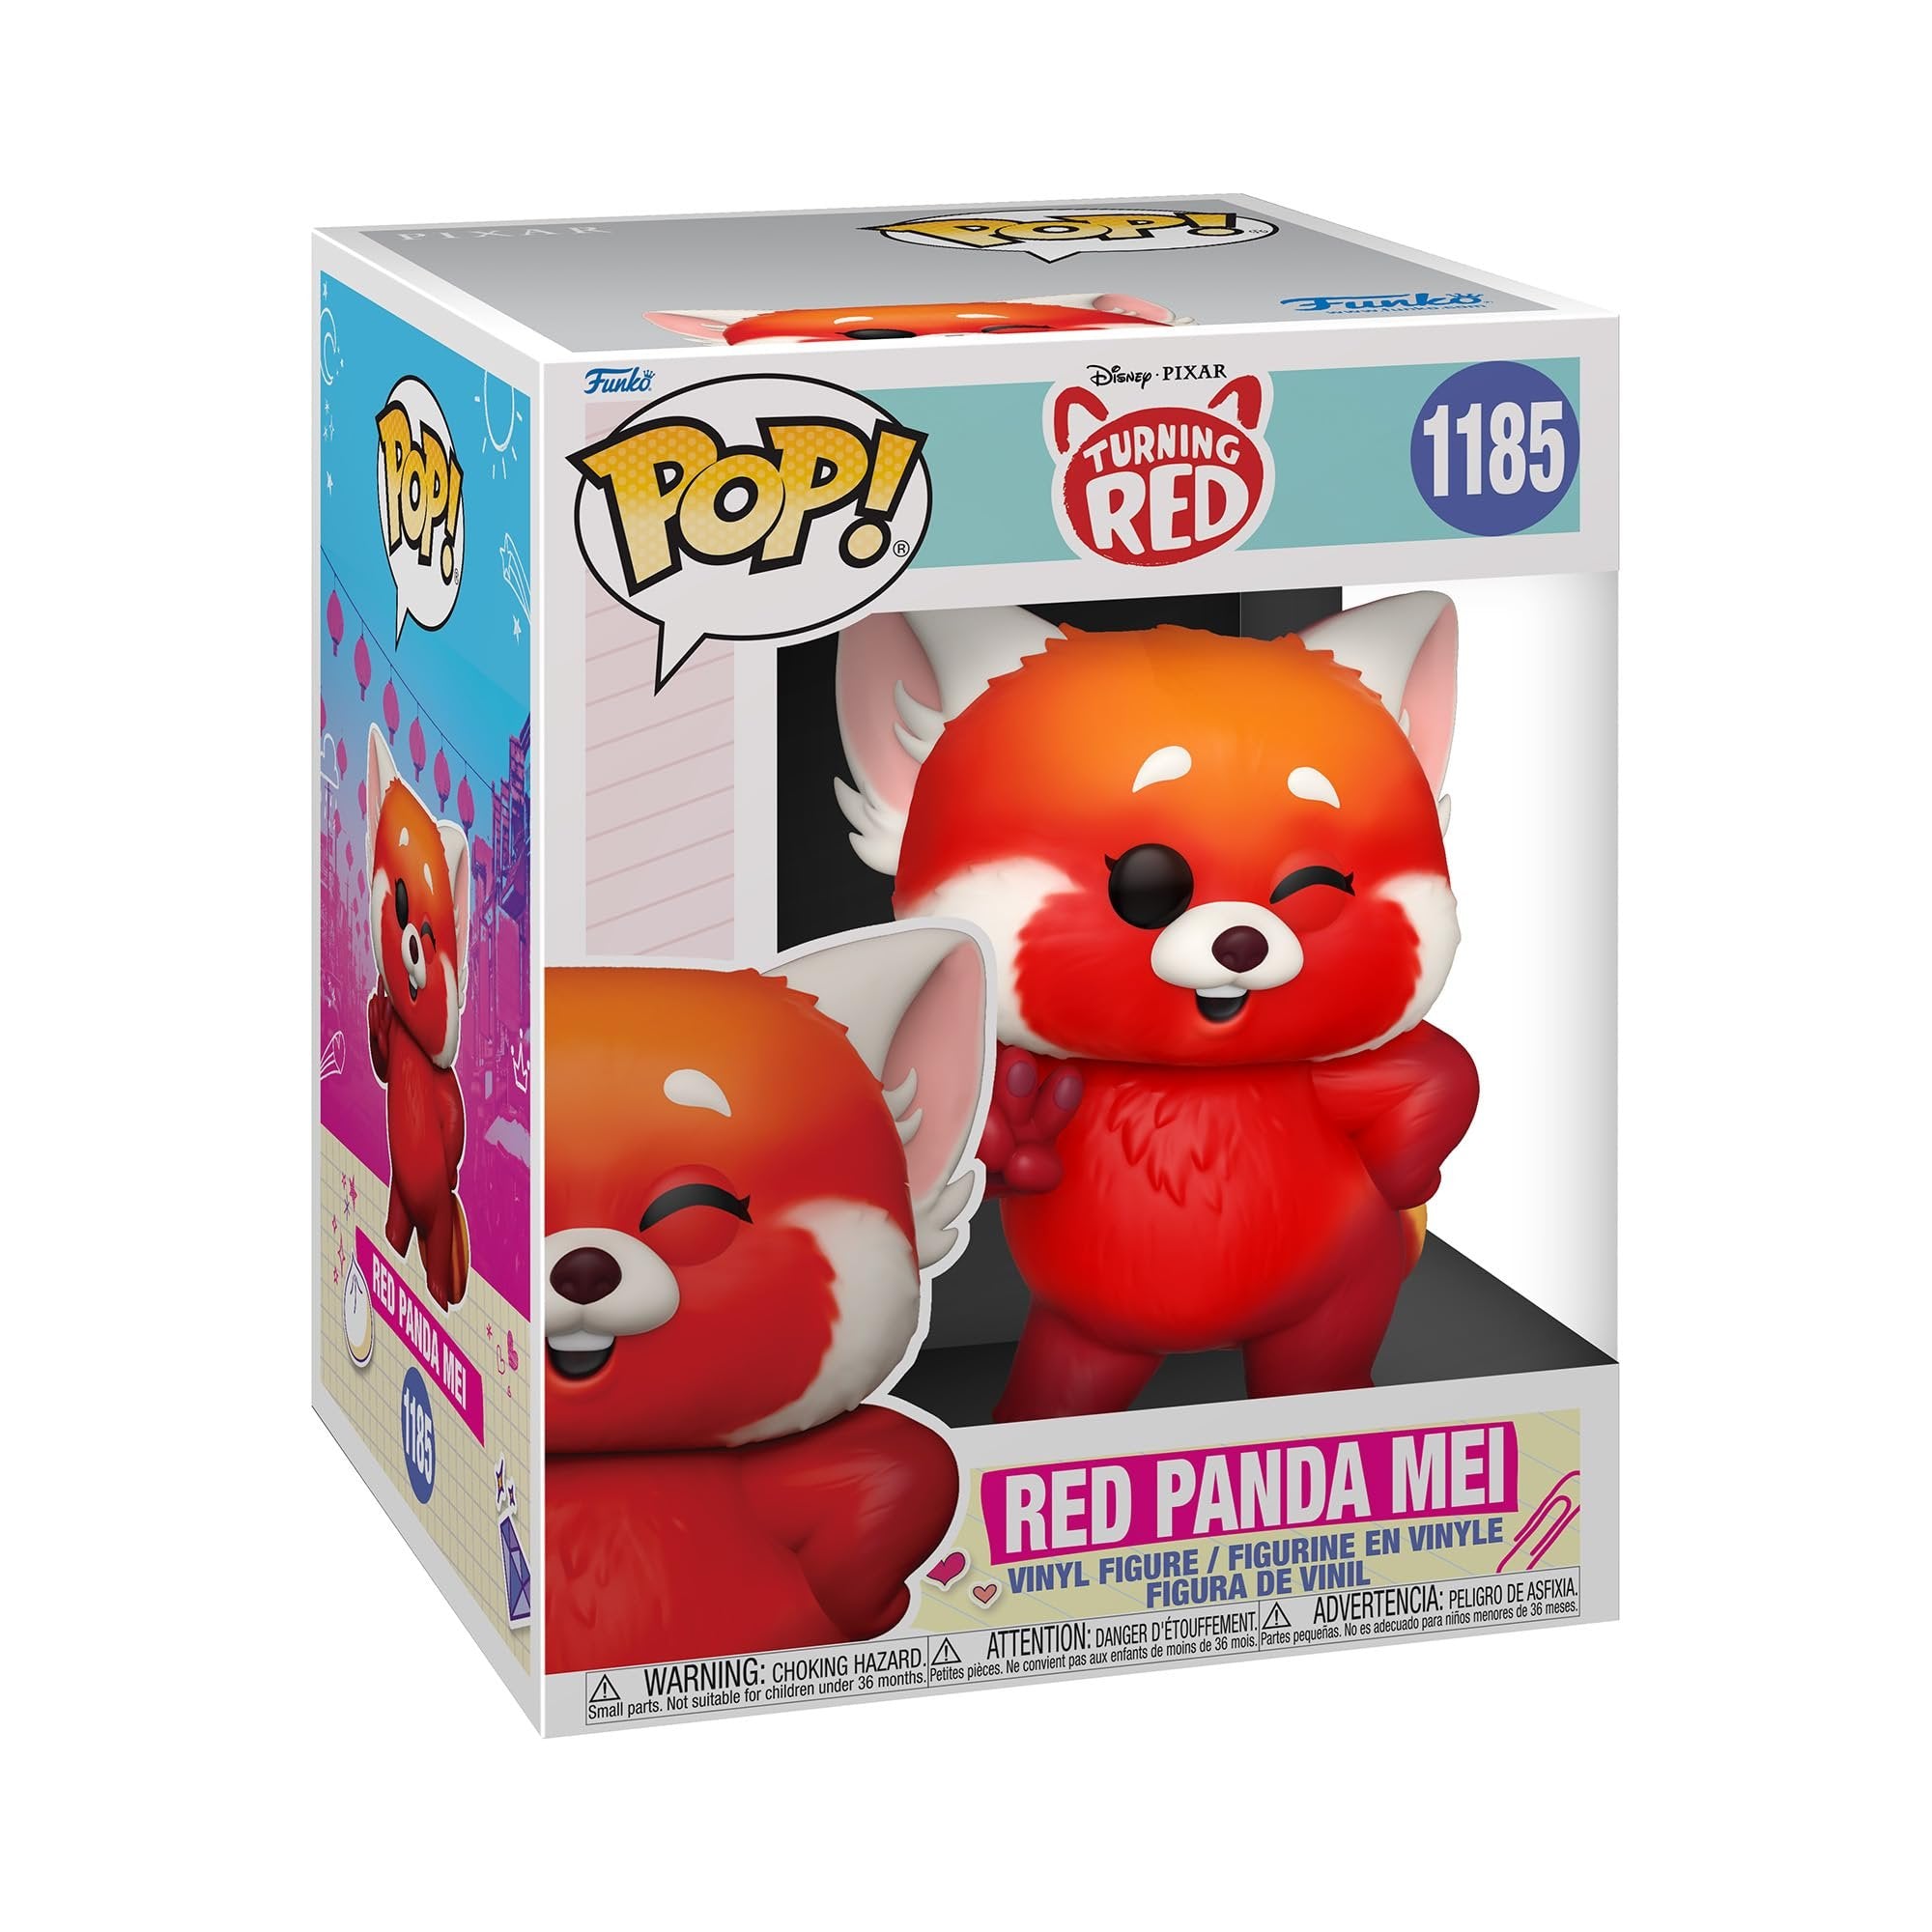 Funko POP! Super: Turning Red - Meilin Lee - Red Panda Mei - Collectible Vinyl Figure - Gift Idea - Official Merchandise - for Kids & Adults - Movies Fans - Model Figure for Collectors and Display